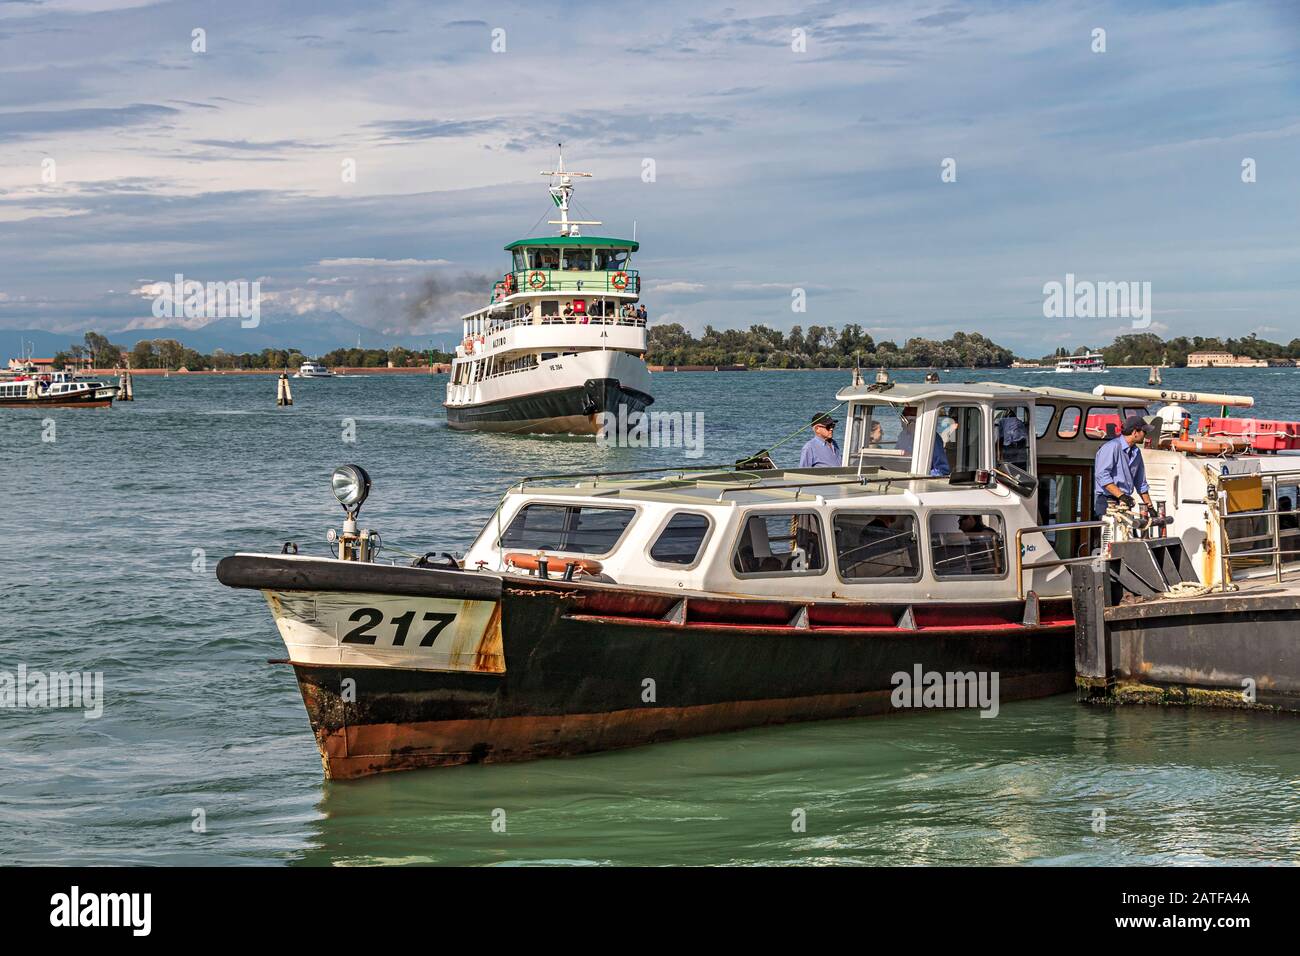 A route14 vaporetto or water bus at the Lido Vaporetto stop as the ferry Altino approaches in the distance on The Venice lagoon ,Venice .Italy Stock Photo